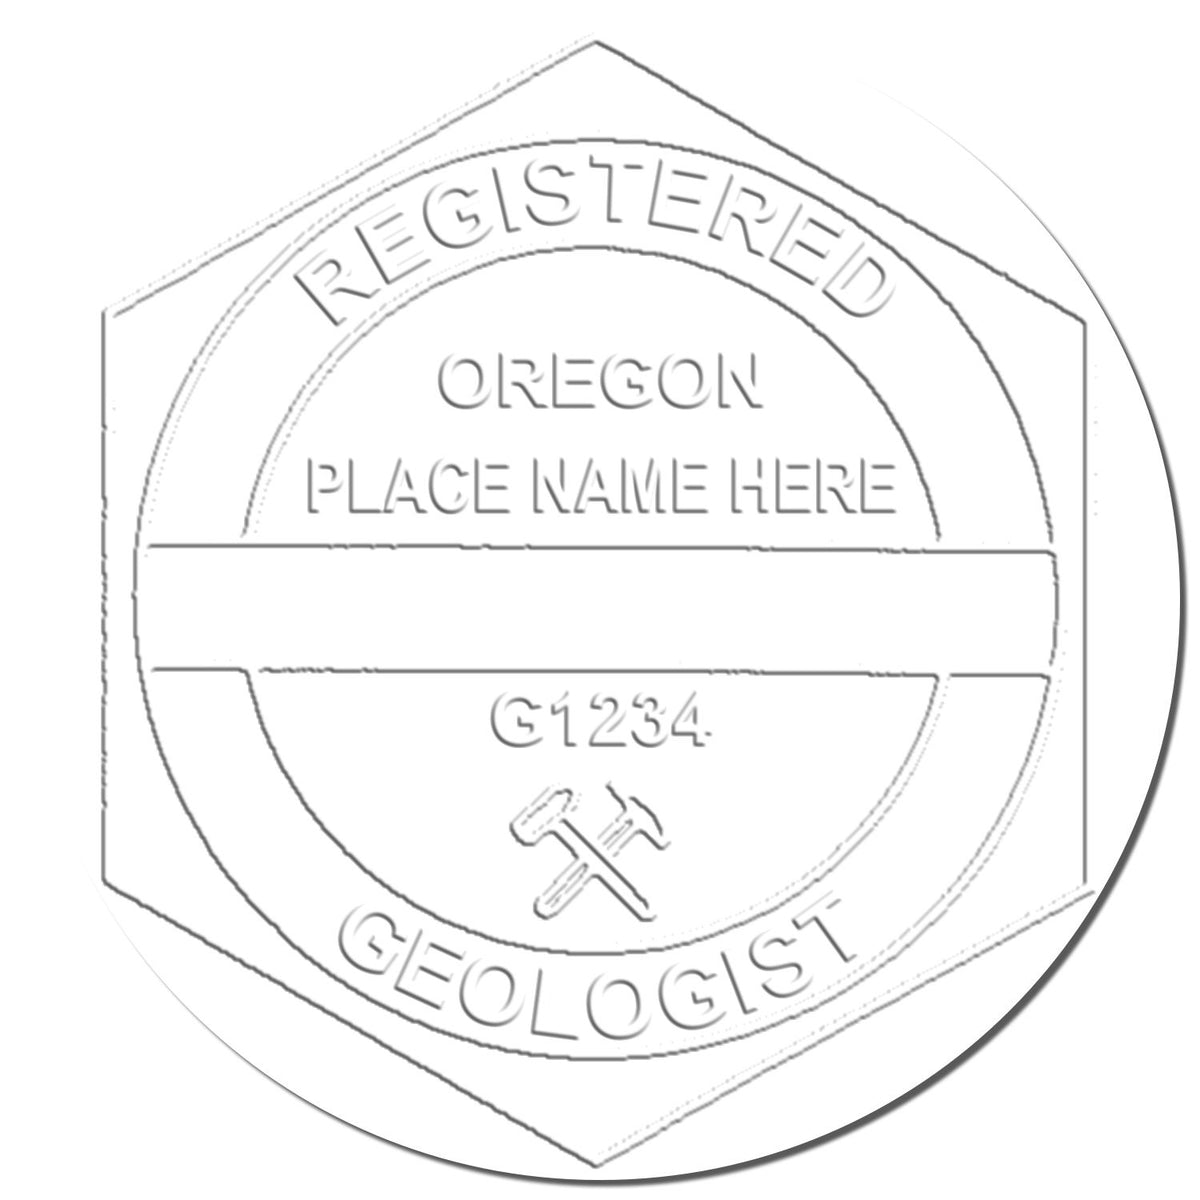 This paper is stamped with a sample imprint of the Handheld Oregon Professional Geologist Embosser, signifying its quality and reliability.